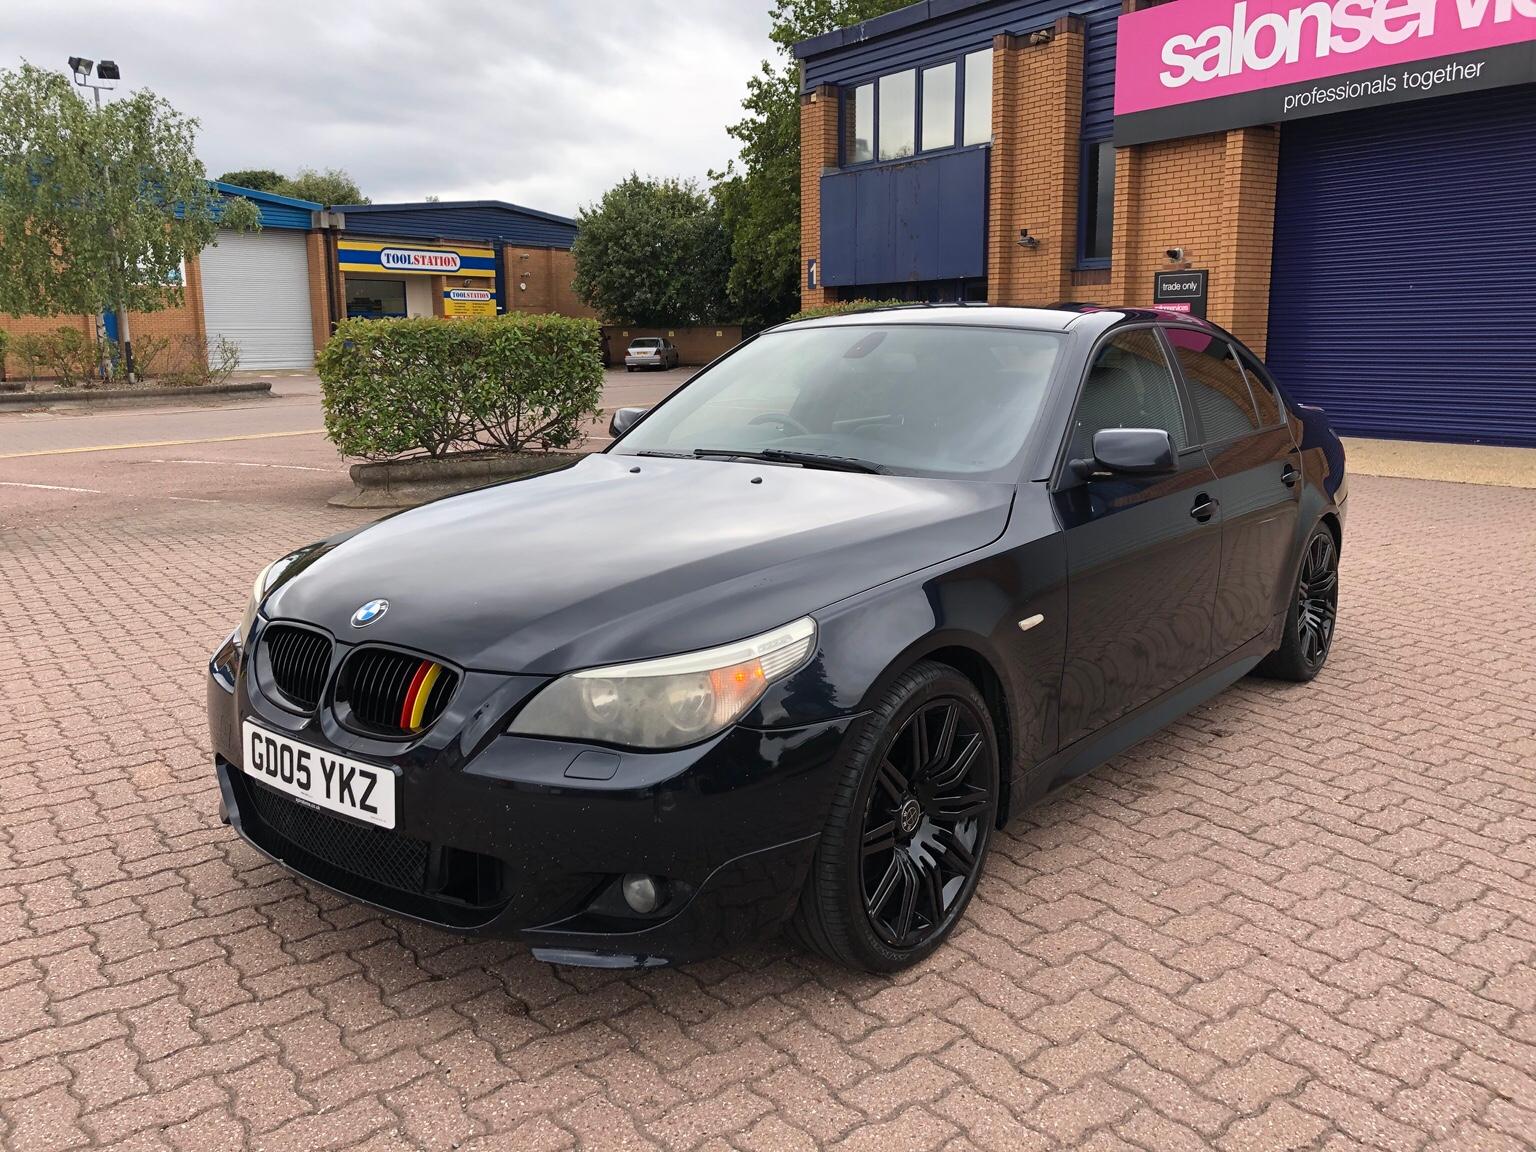 Bmw 535d e60 Msport remapped 370bhp in Slough for £5,500